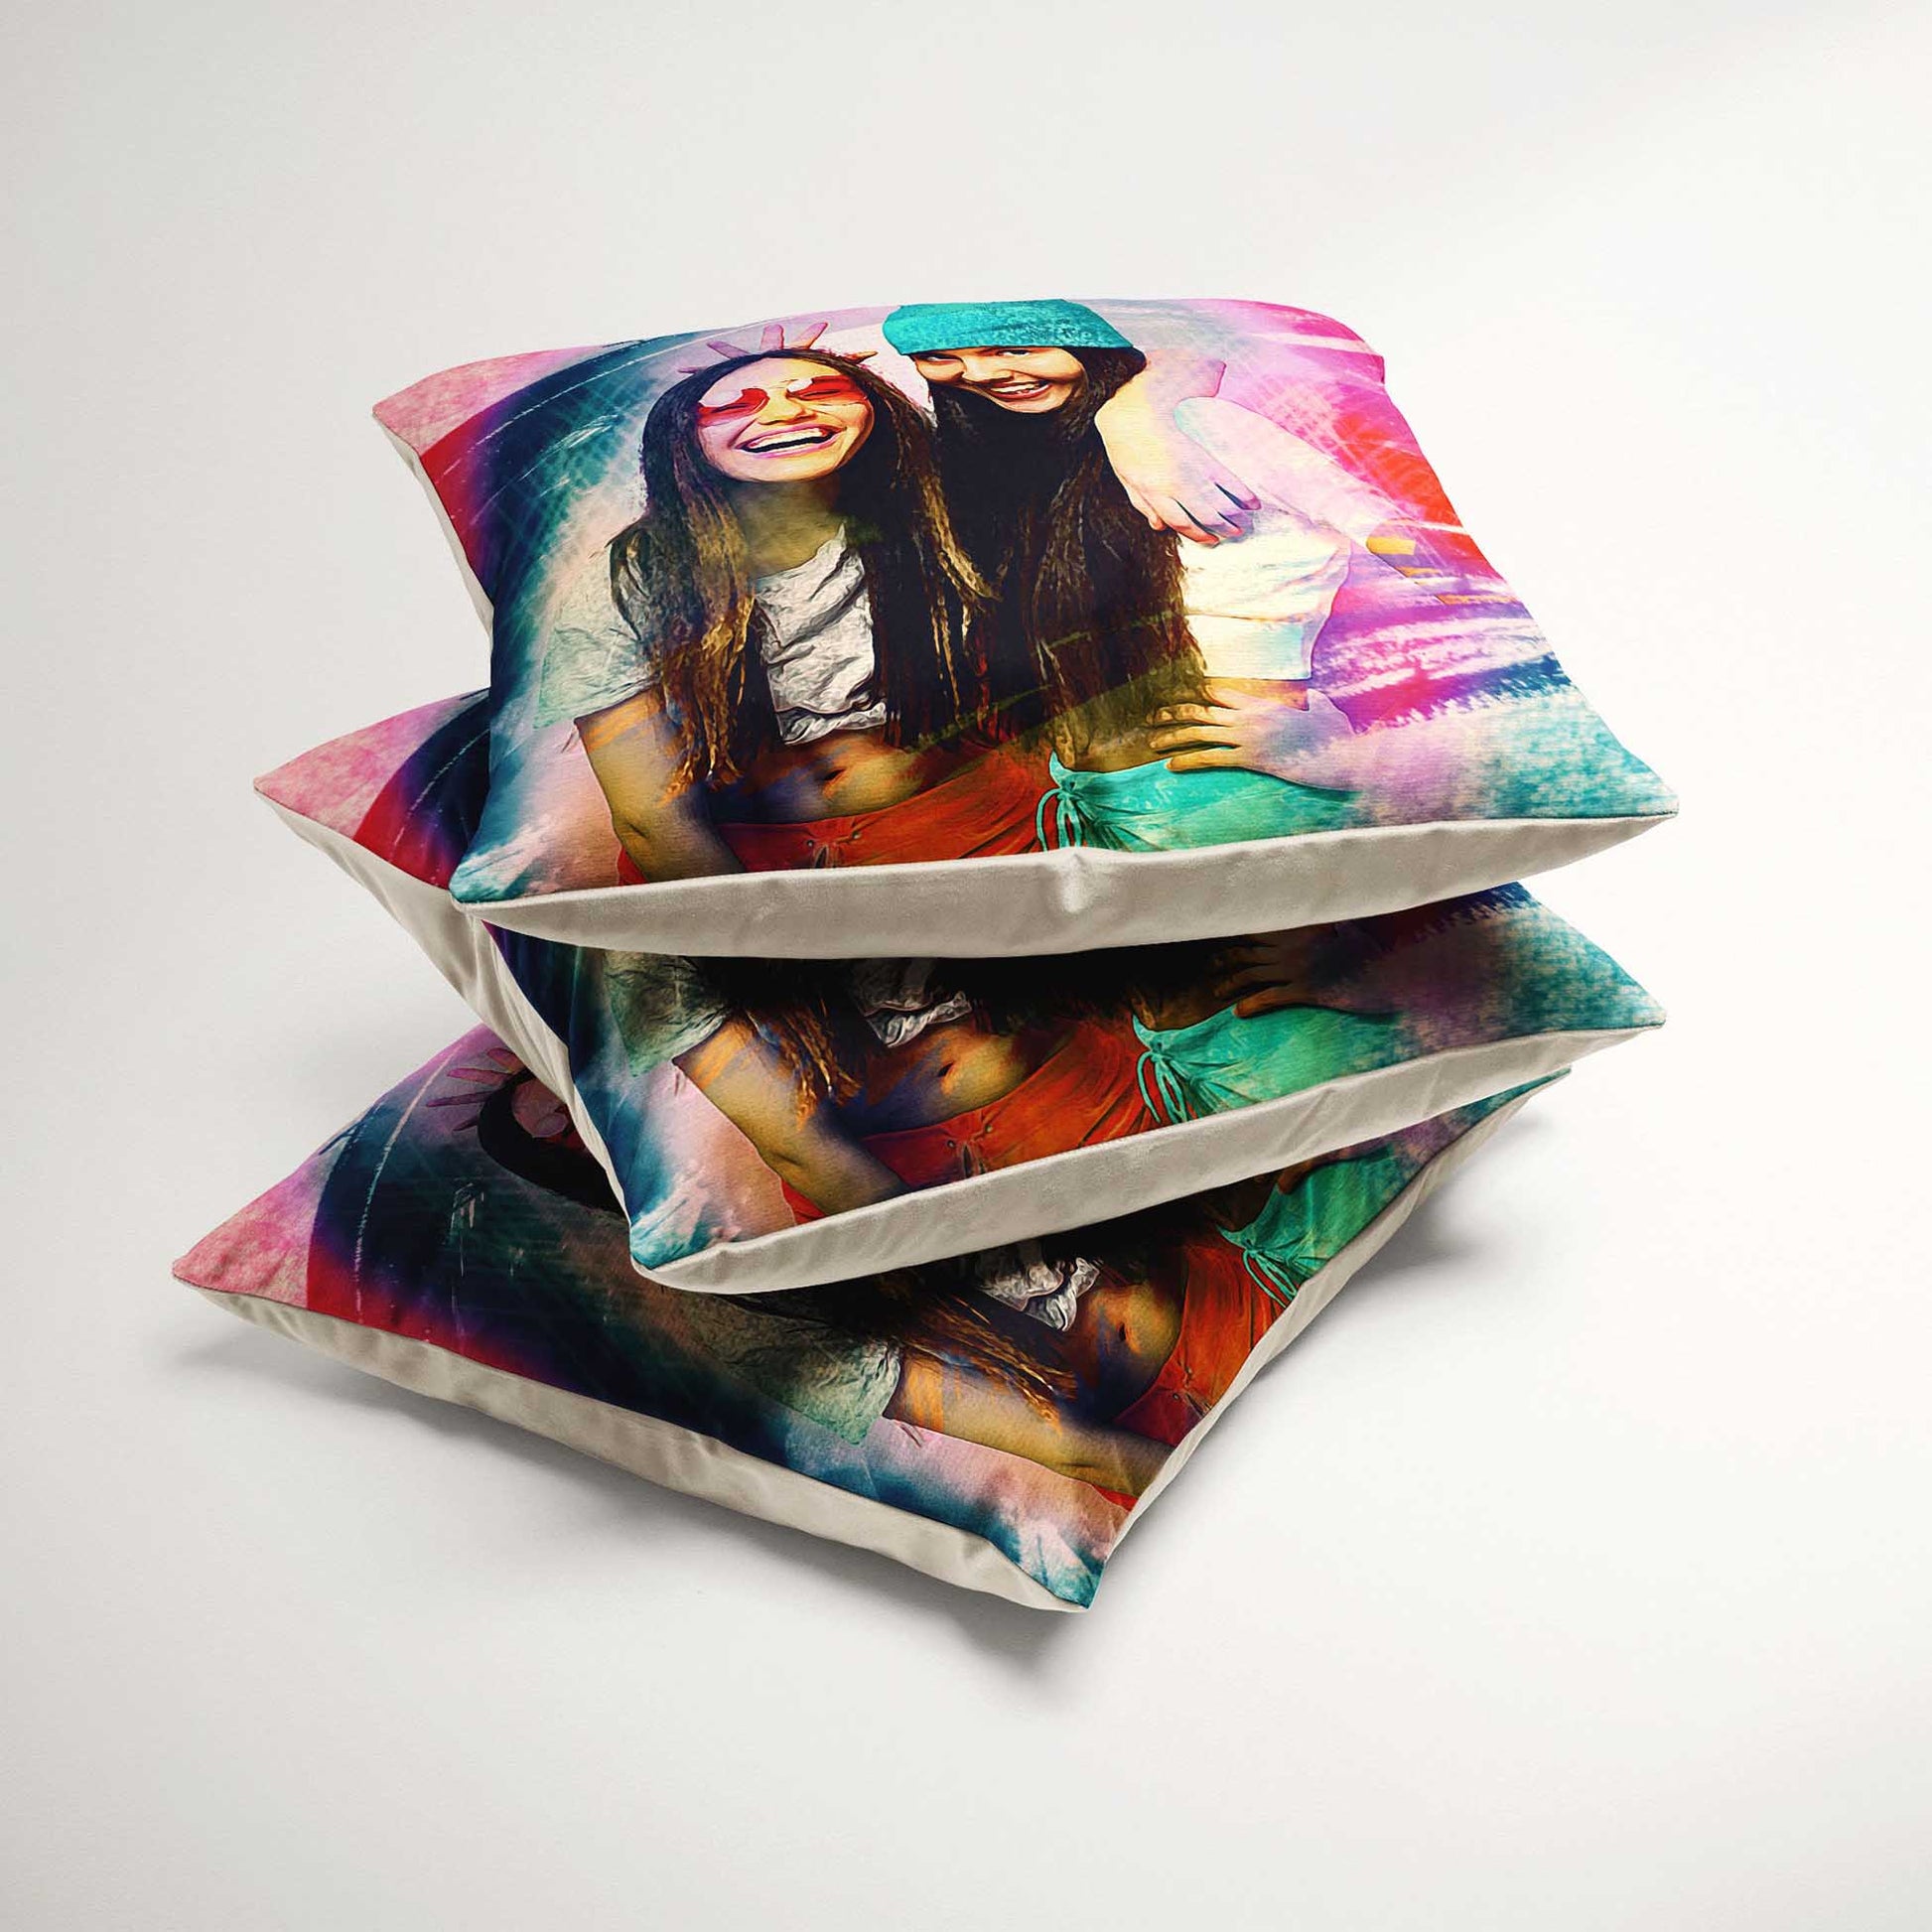 Elevate your interior design with the Personalised Artistic Brush Painting Cushion. Crafted by hand using luxurious velvet fabric, this unique cushion features a print from your photo, adding a touch of originality to your space